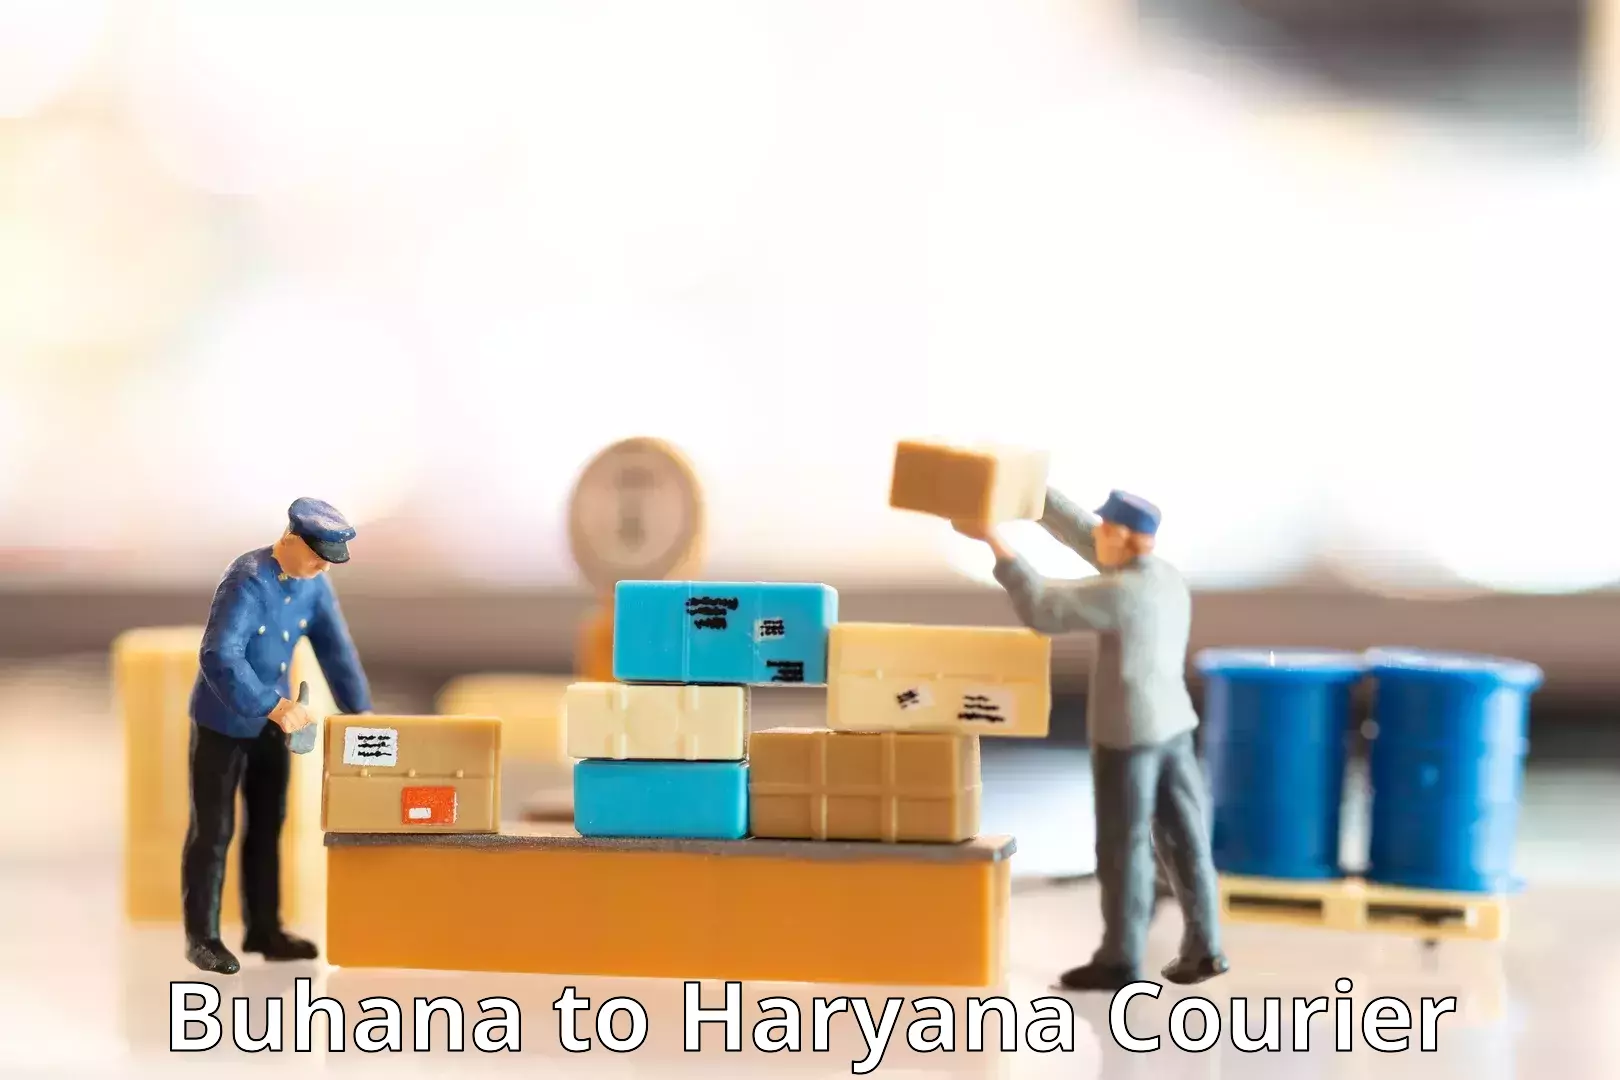 Cash on delivery service Buhana to Haryana